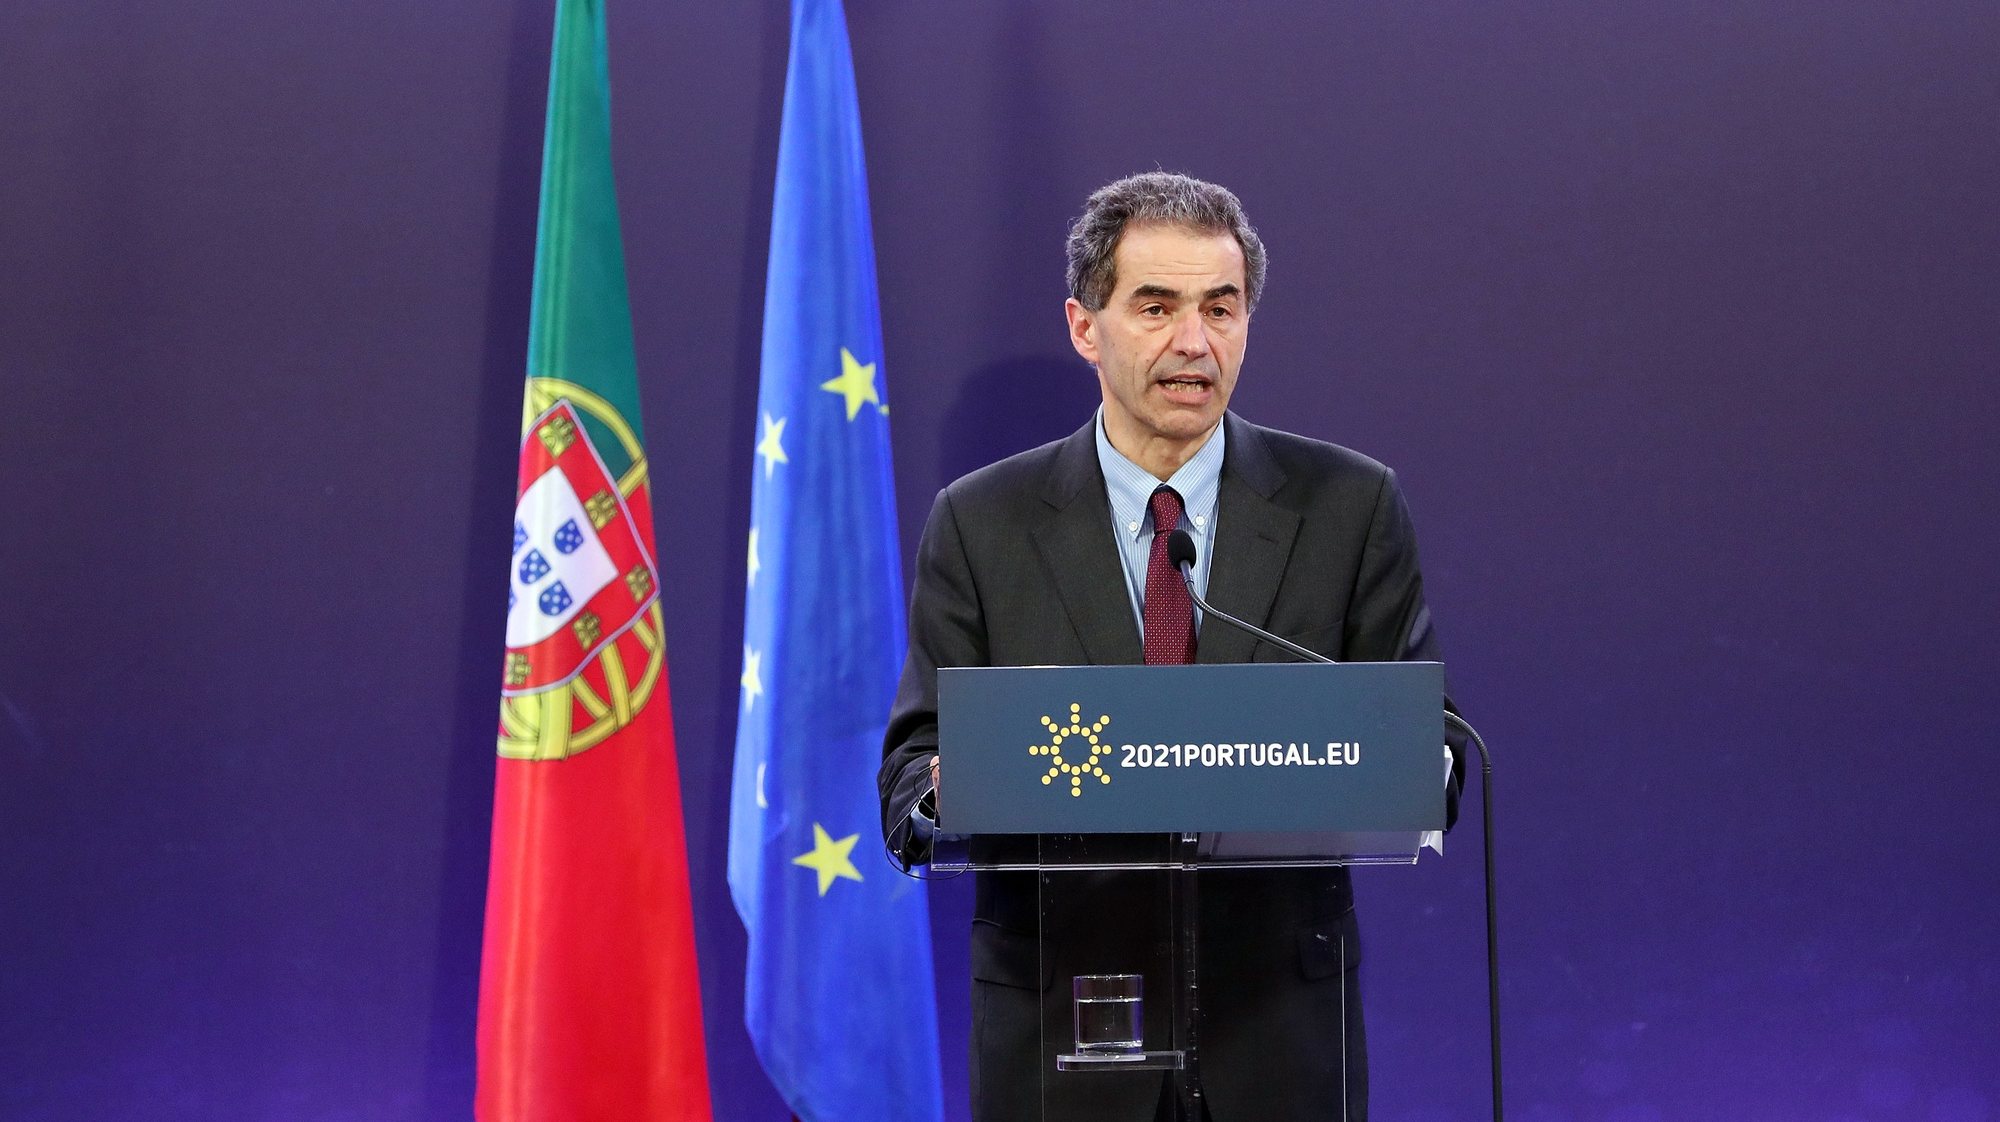 epa08984674 Portuguese Minister for Science, Technology and Higher Education Manuel Heitor attends a press conference following an informal video conference of European Union Competitiveness Ministers responsible for Research and Innovation, in Lisbon, Portugal, 03 February 2021, a day after the official launch of the Horizon Europe programme for 2021-2027, under the Portuguese Presidency of the Council. The meeting was aimed at further discussion in the ongoing debate on reinforcing the European Research Area (ERA), particularly on the development of scientific careers in Europe and to prepare the conclusions to be adopted at the formal meeting of ministers, which will take place in Brussels in late May.  EPA/ANTONIO PEDRO SANTOS